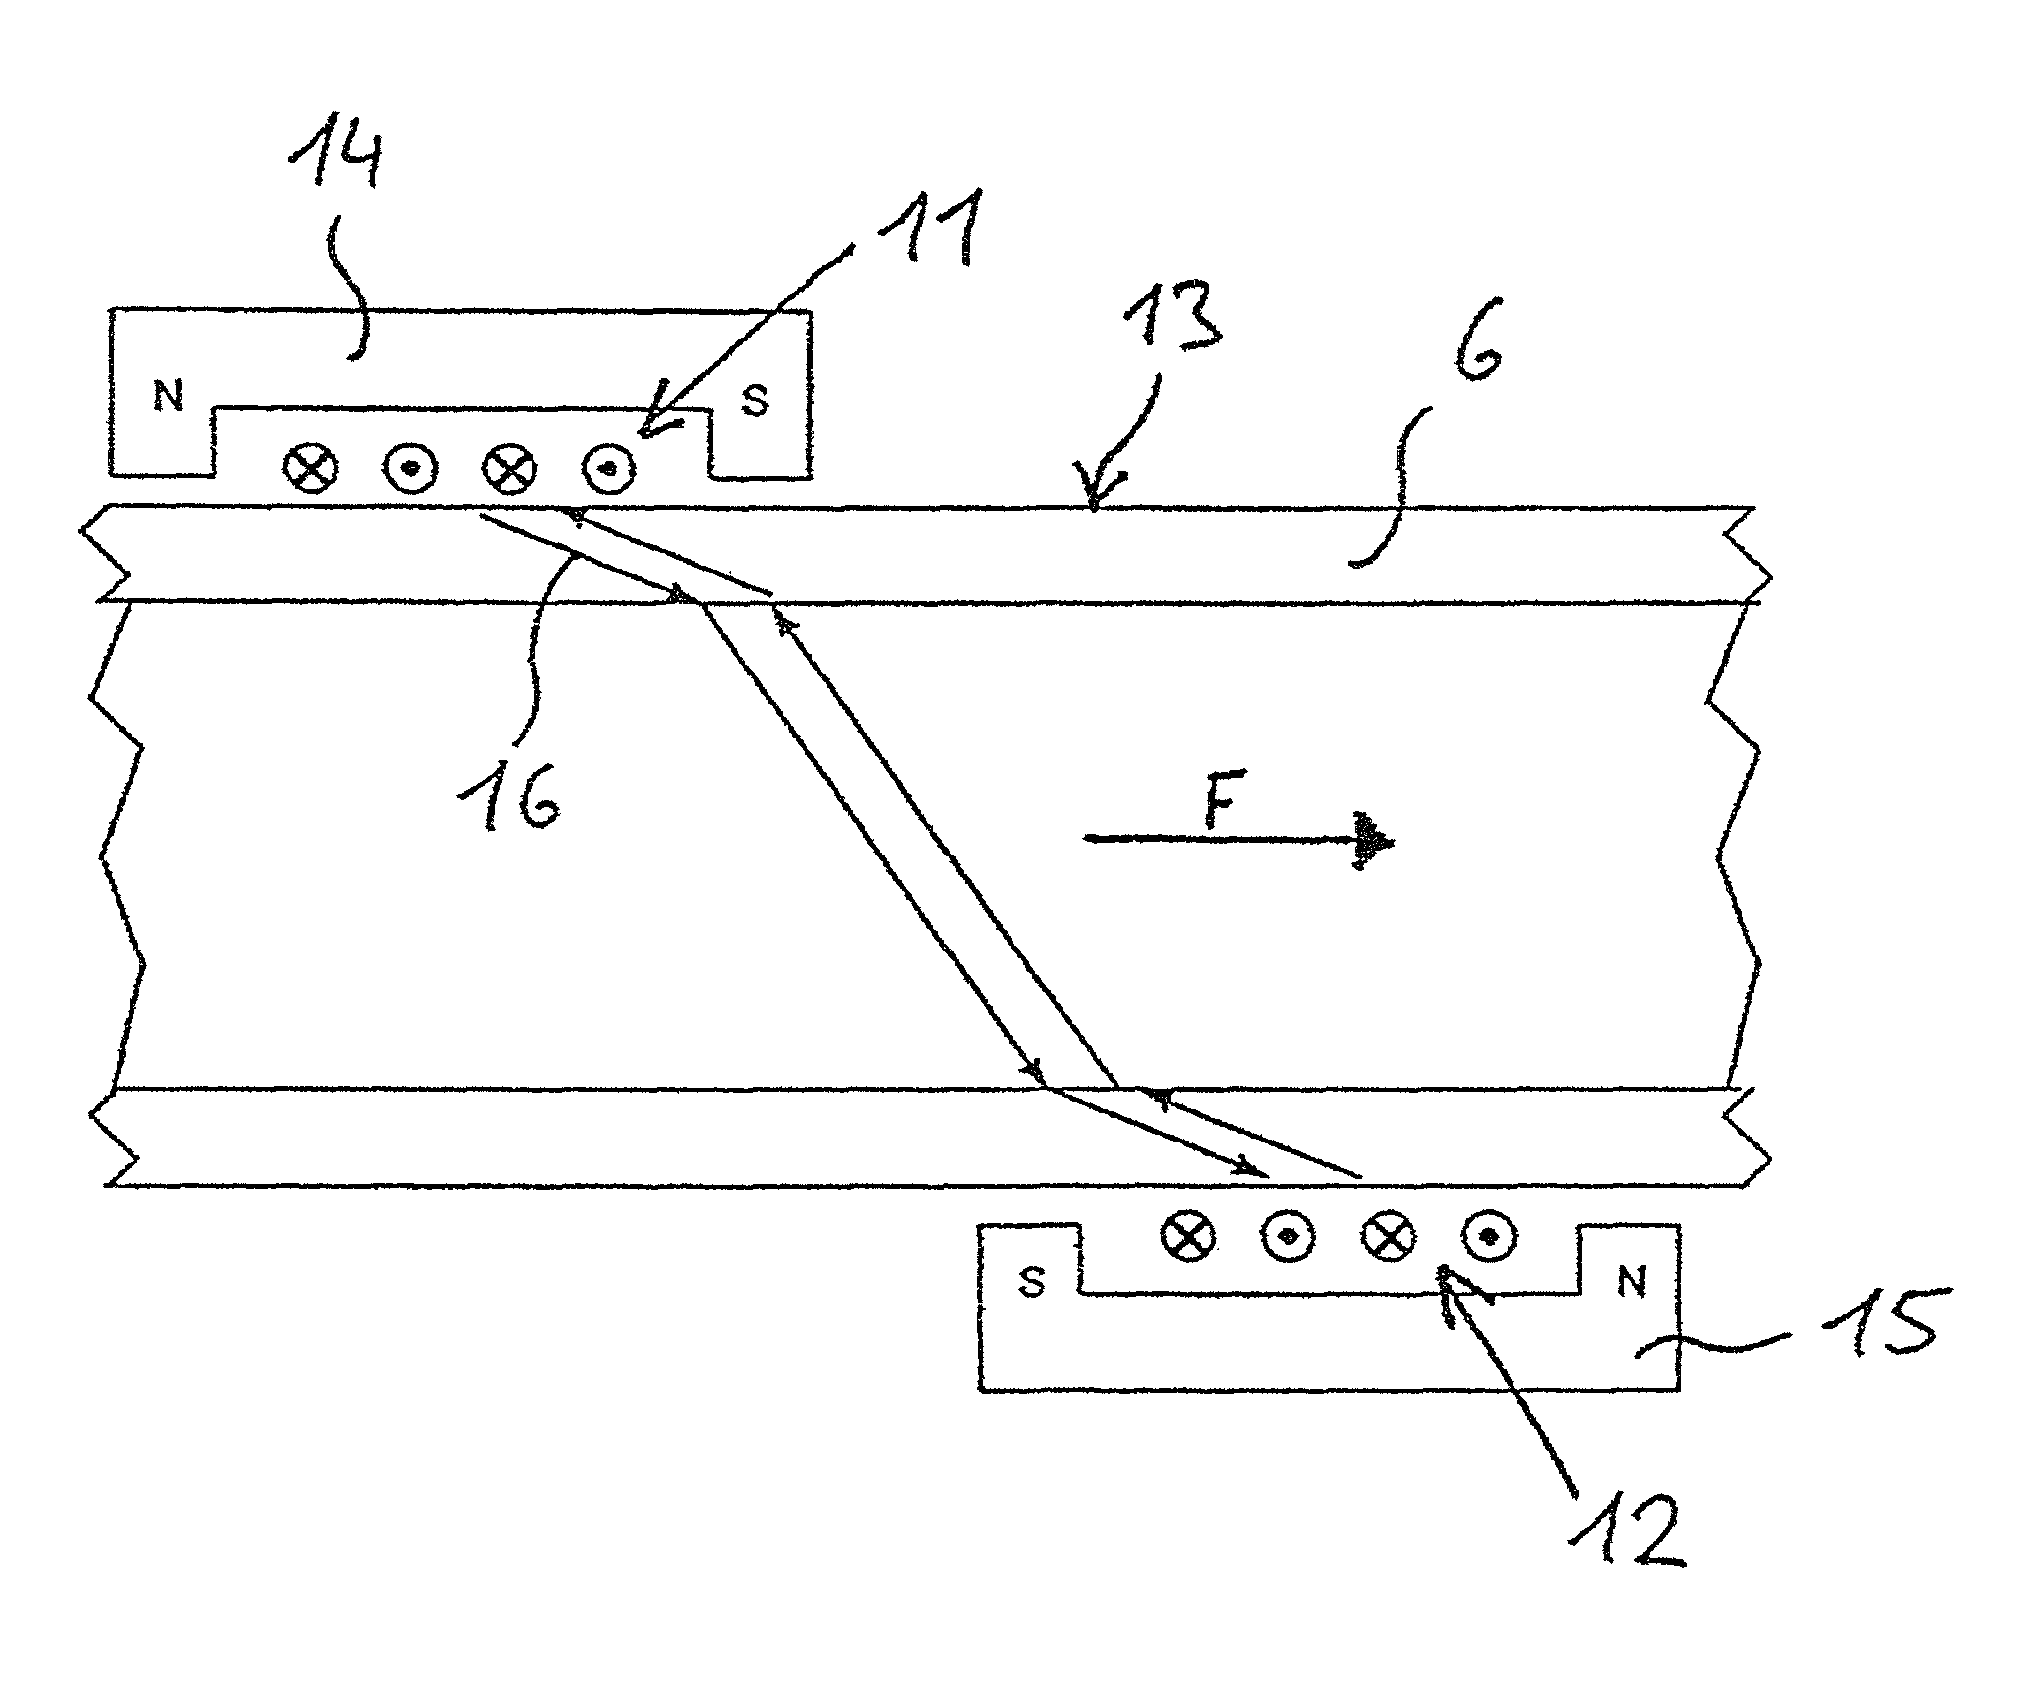 Acoustic flow rate meter having a high frequency induction coil mounted directly on the piping without an acoustic coupling